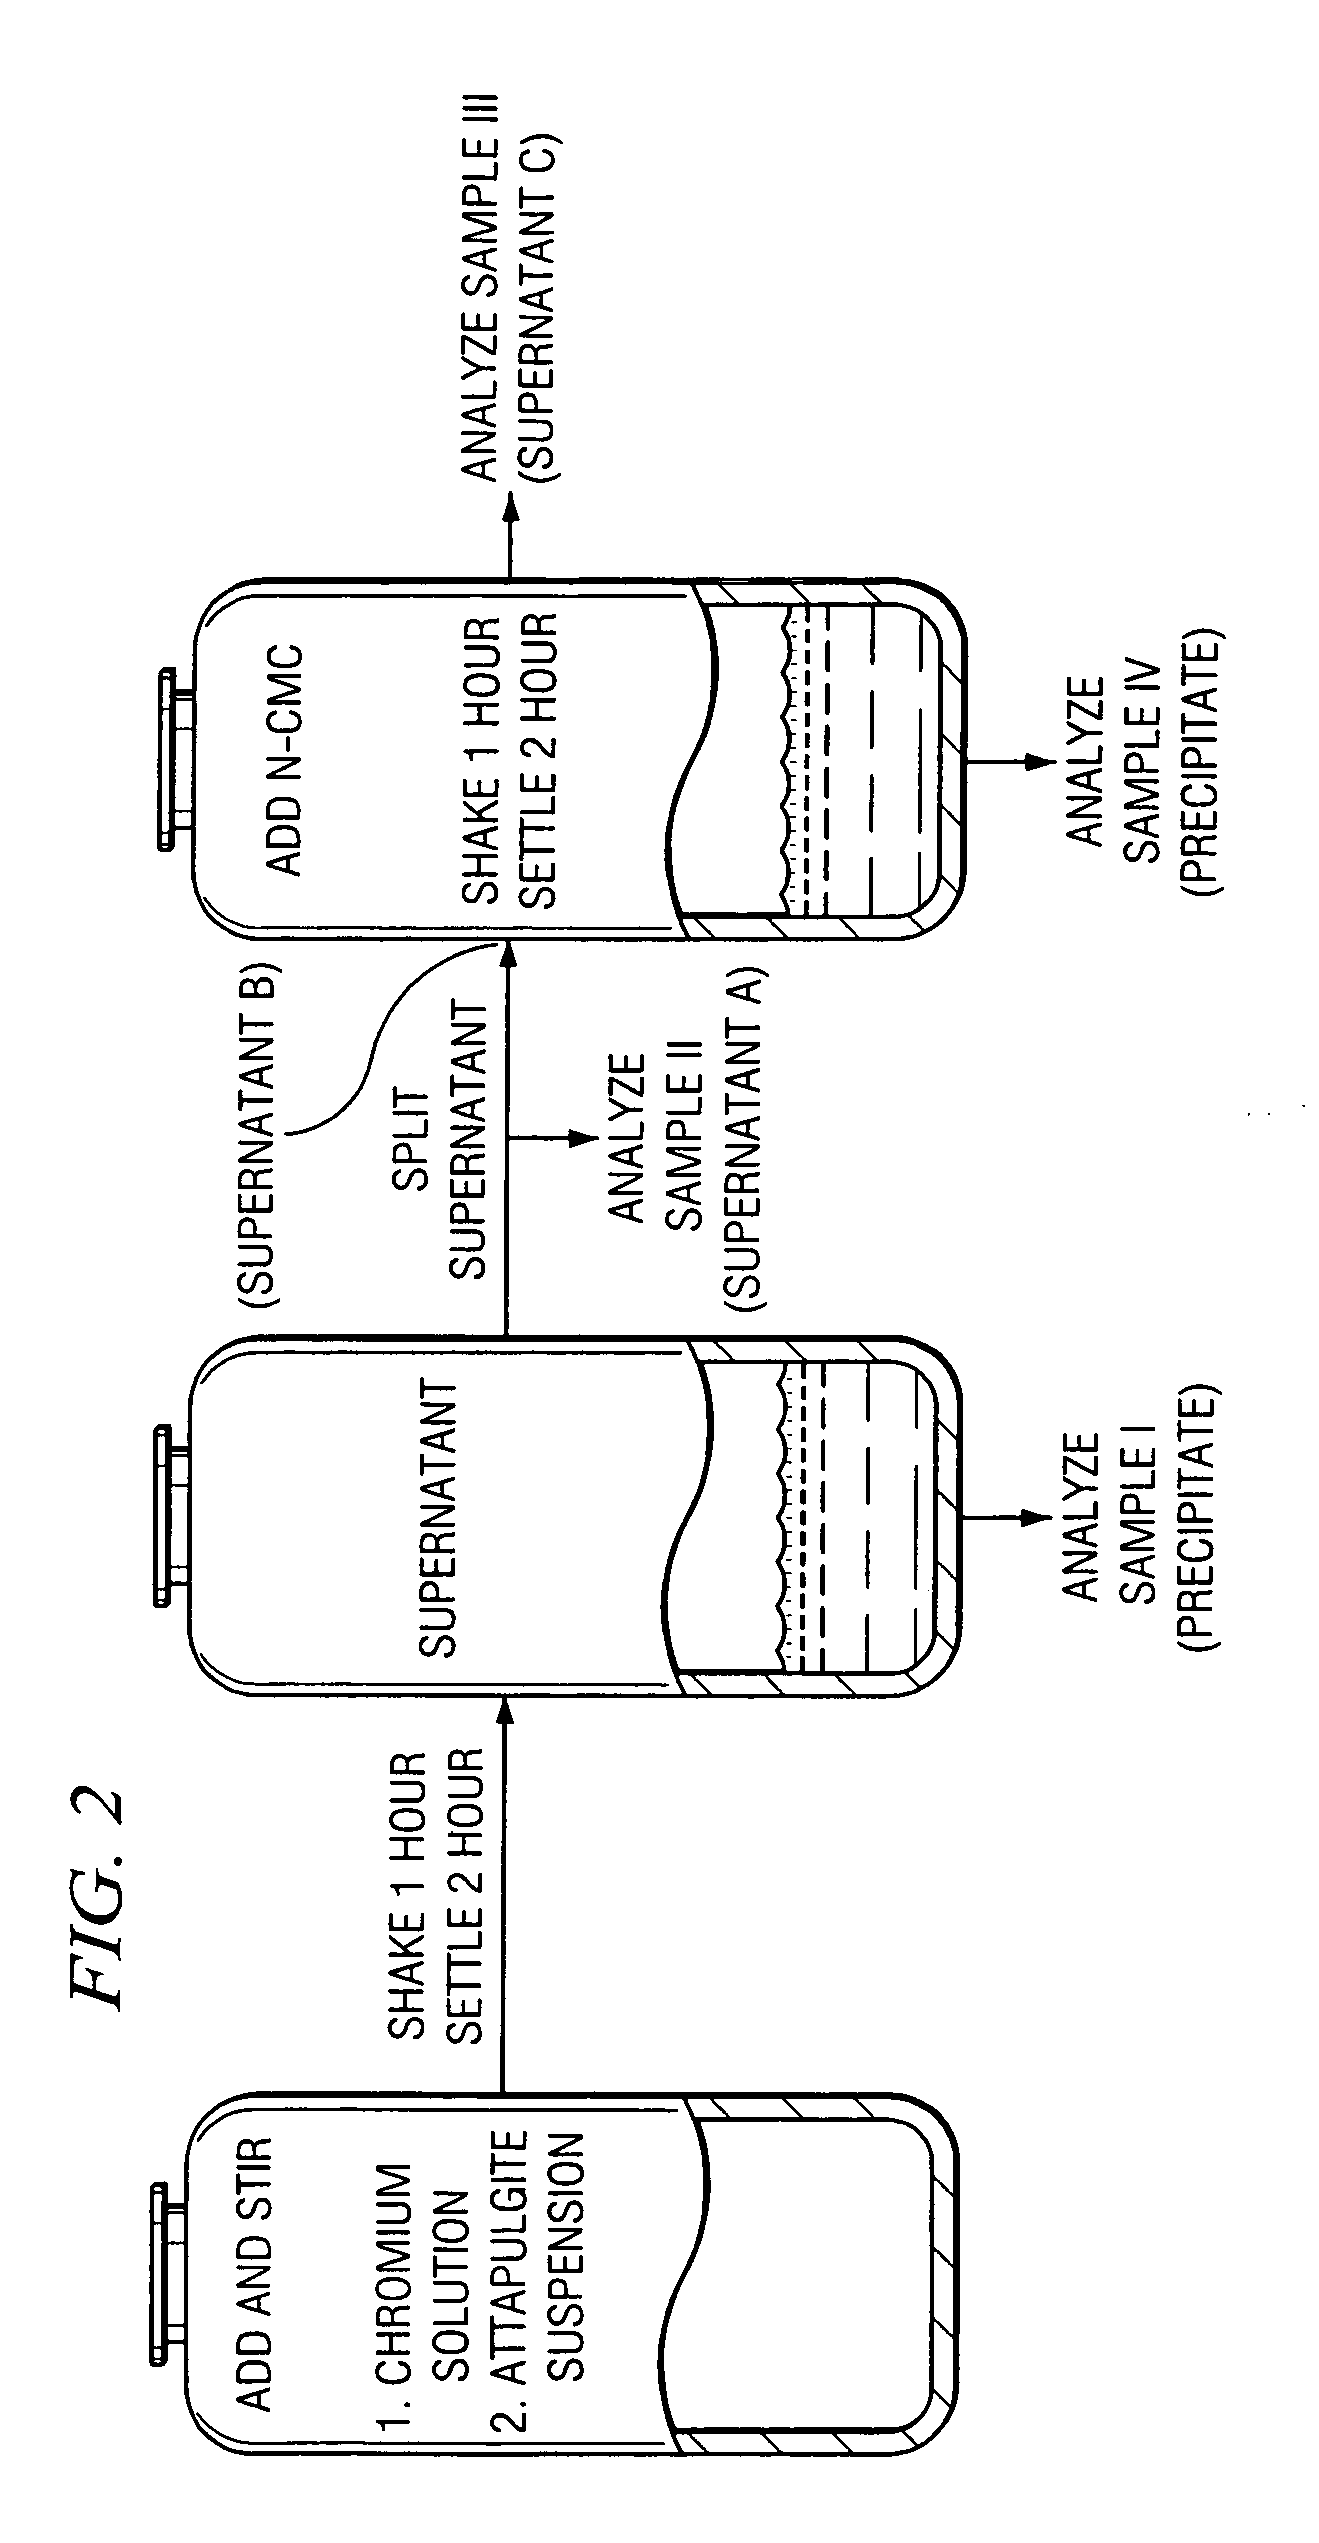 Compositions and methods for removal of toxic metals and radionuclides